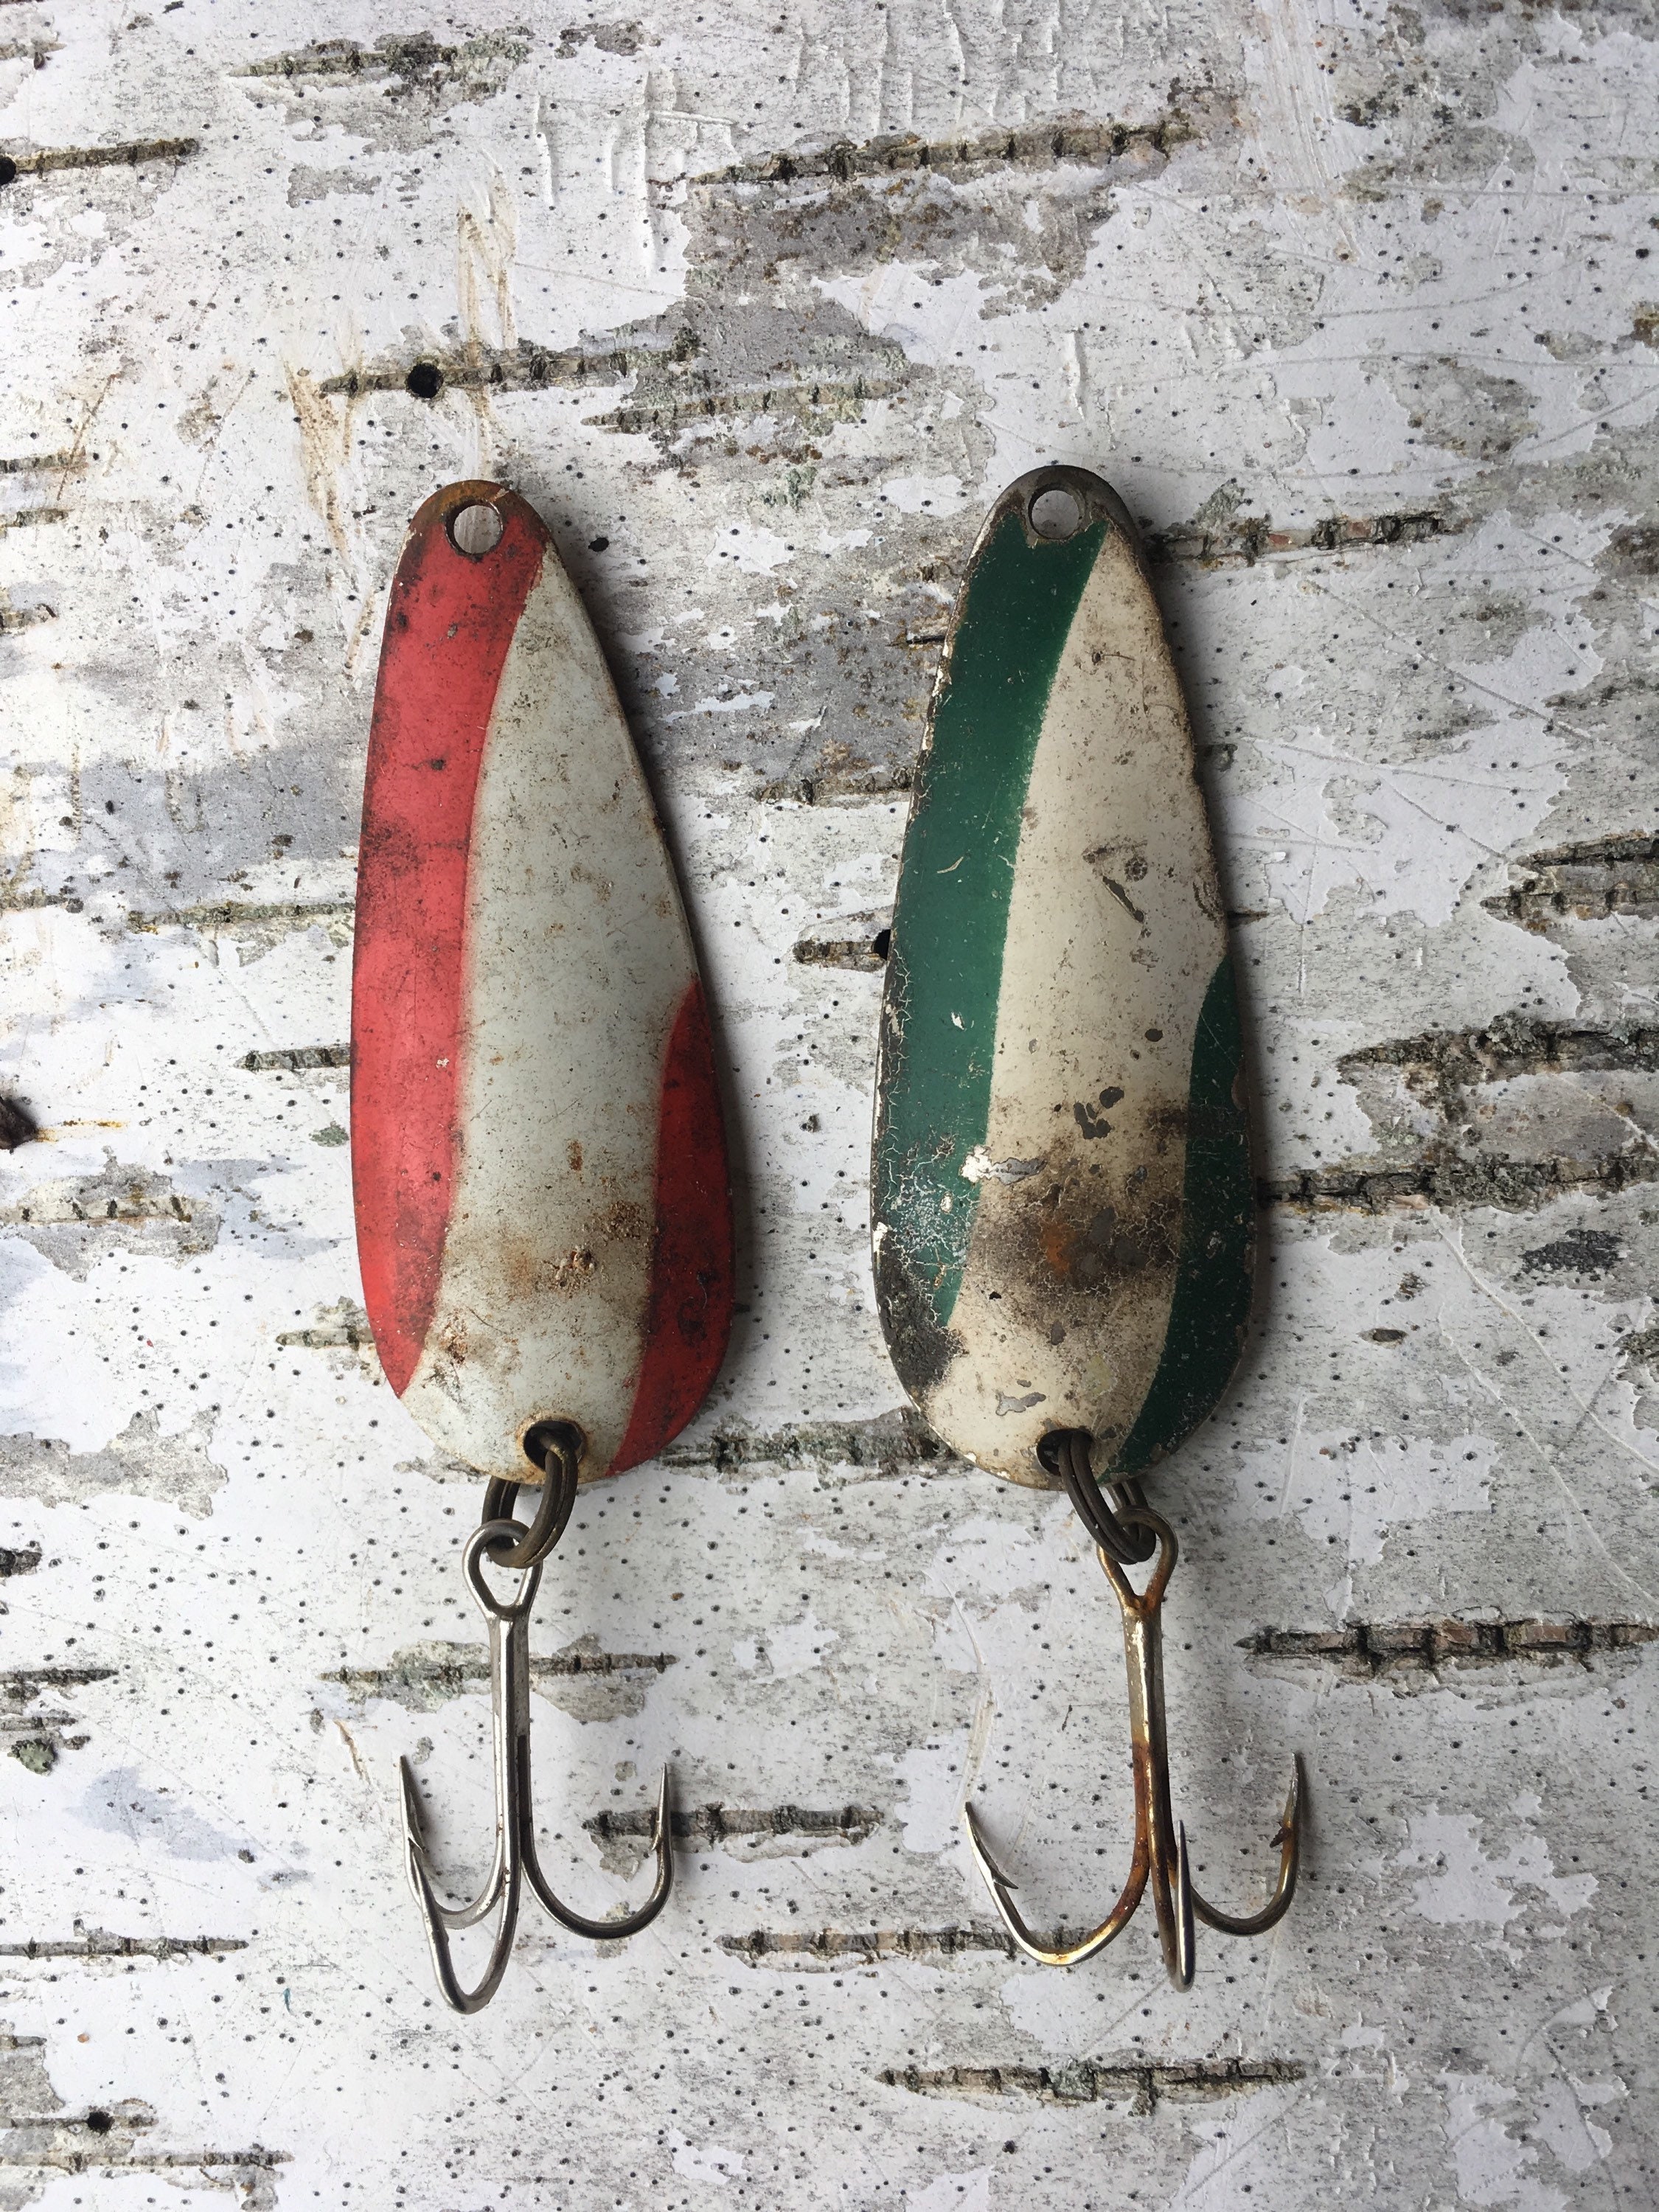 Daredevil Lure Fishing Set Spoon Lot Nebco Fish Old Antique Vintage Cabin  Metal Red White Green Flash Bait Aqua Small Pike LOT F -  Canada